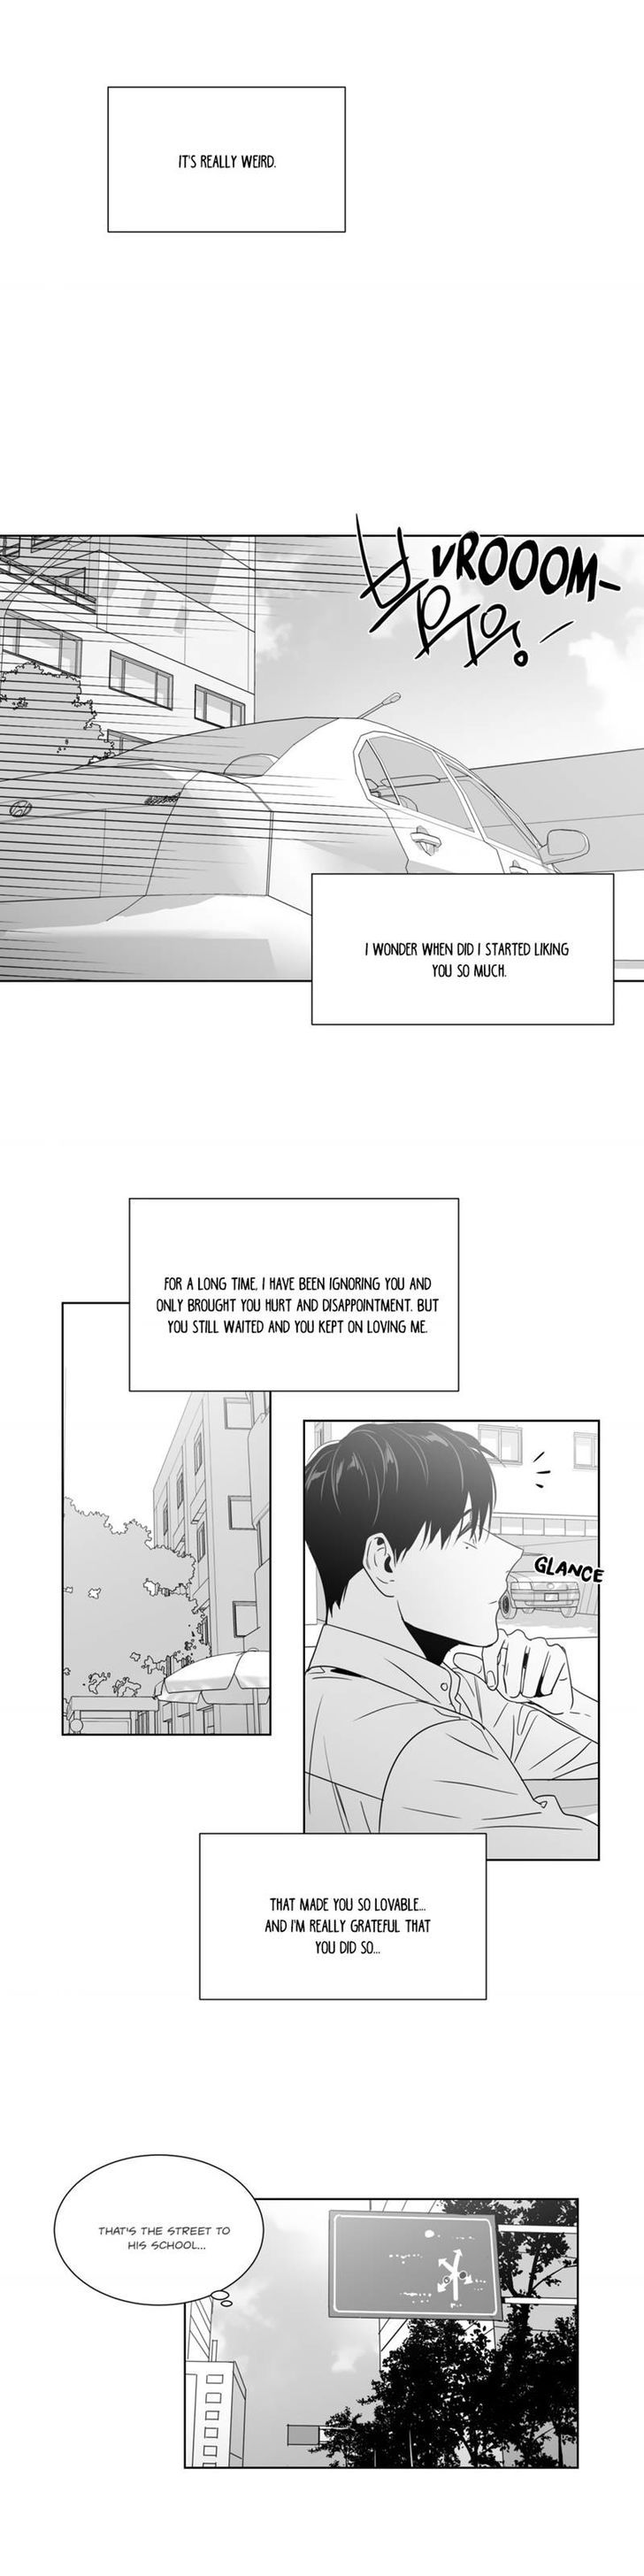 Lover Boy (Lezhin) Chapter 037 page 14